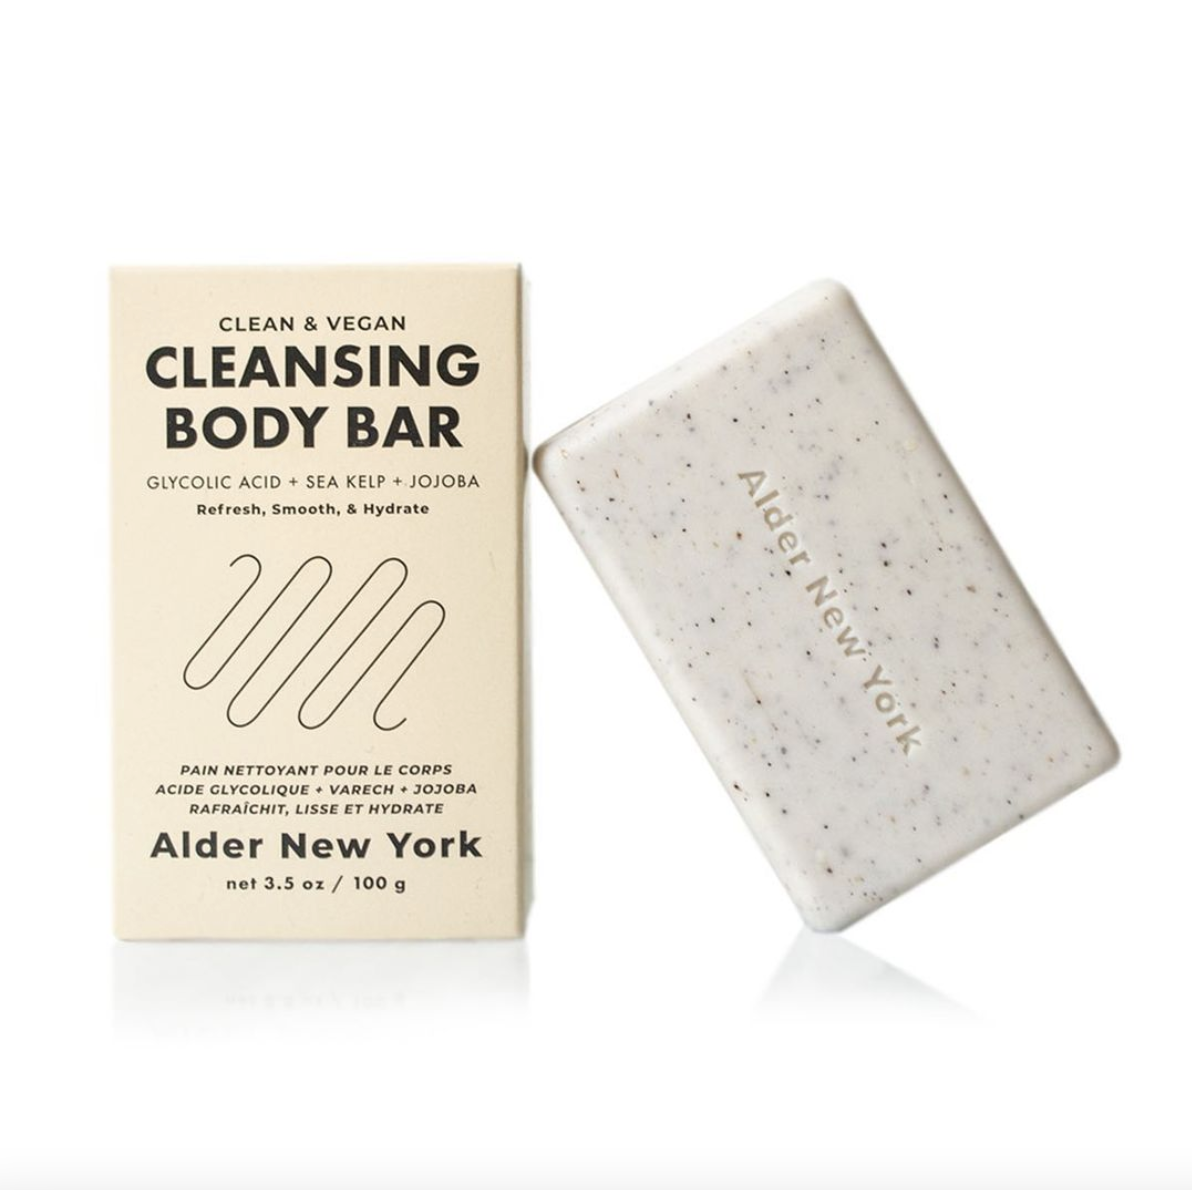 Cleansing Body Bar leaning against its box